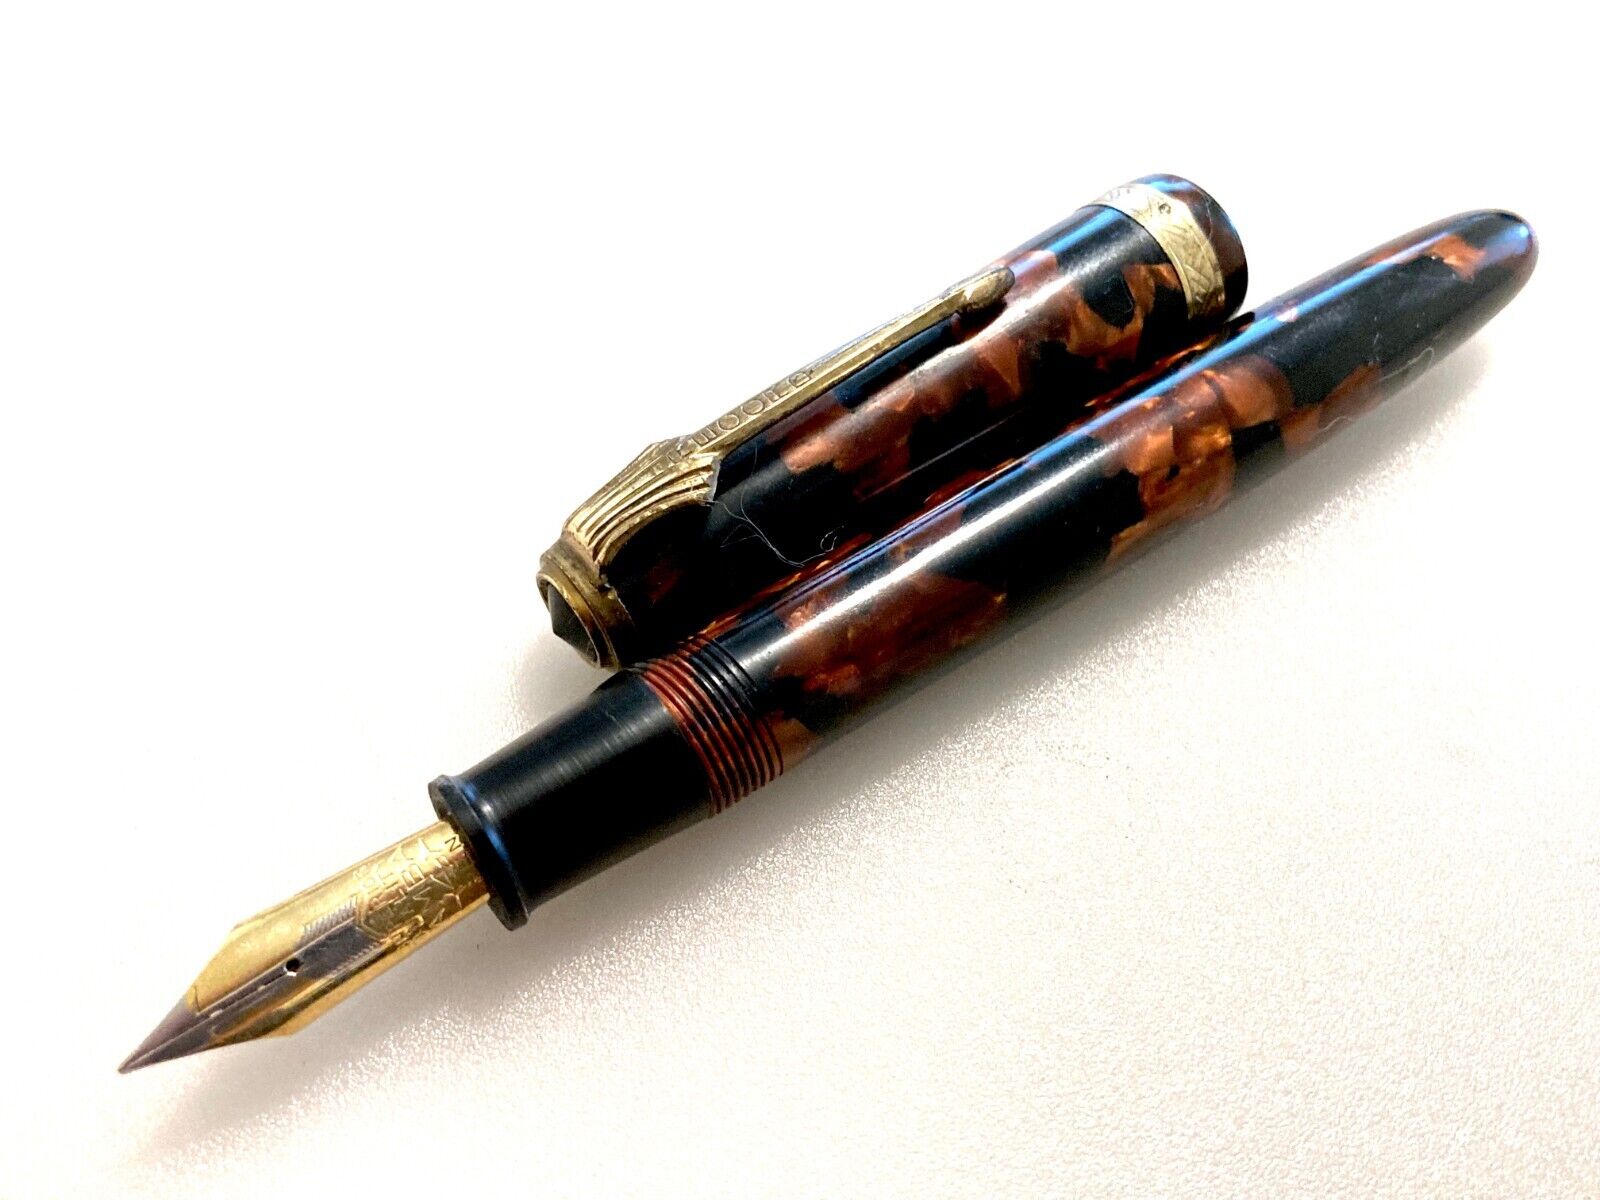 Japanese  vintage  fountain pen RECORD  with  ink sack selling very well